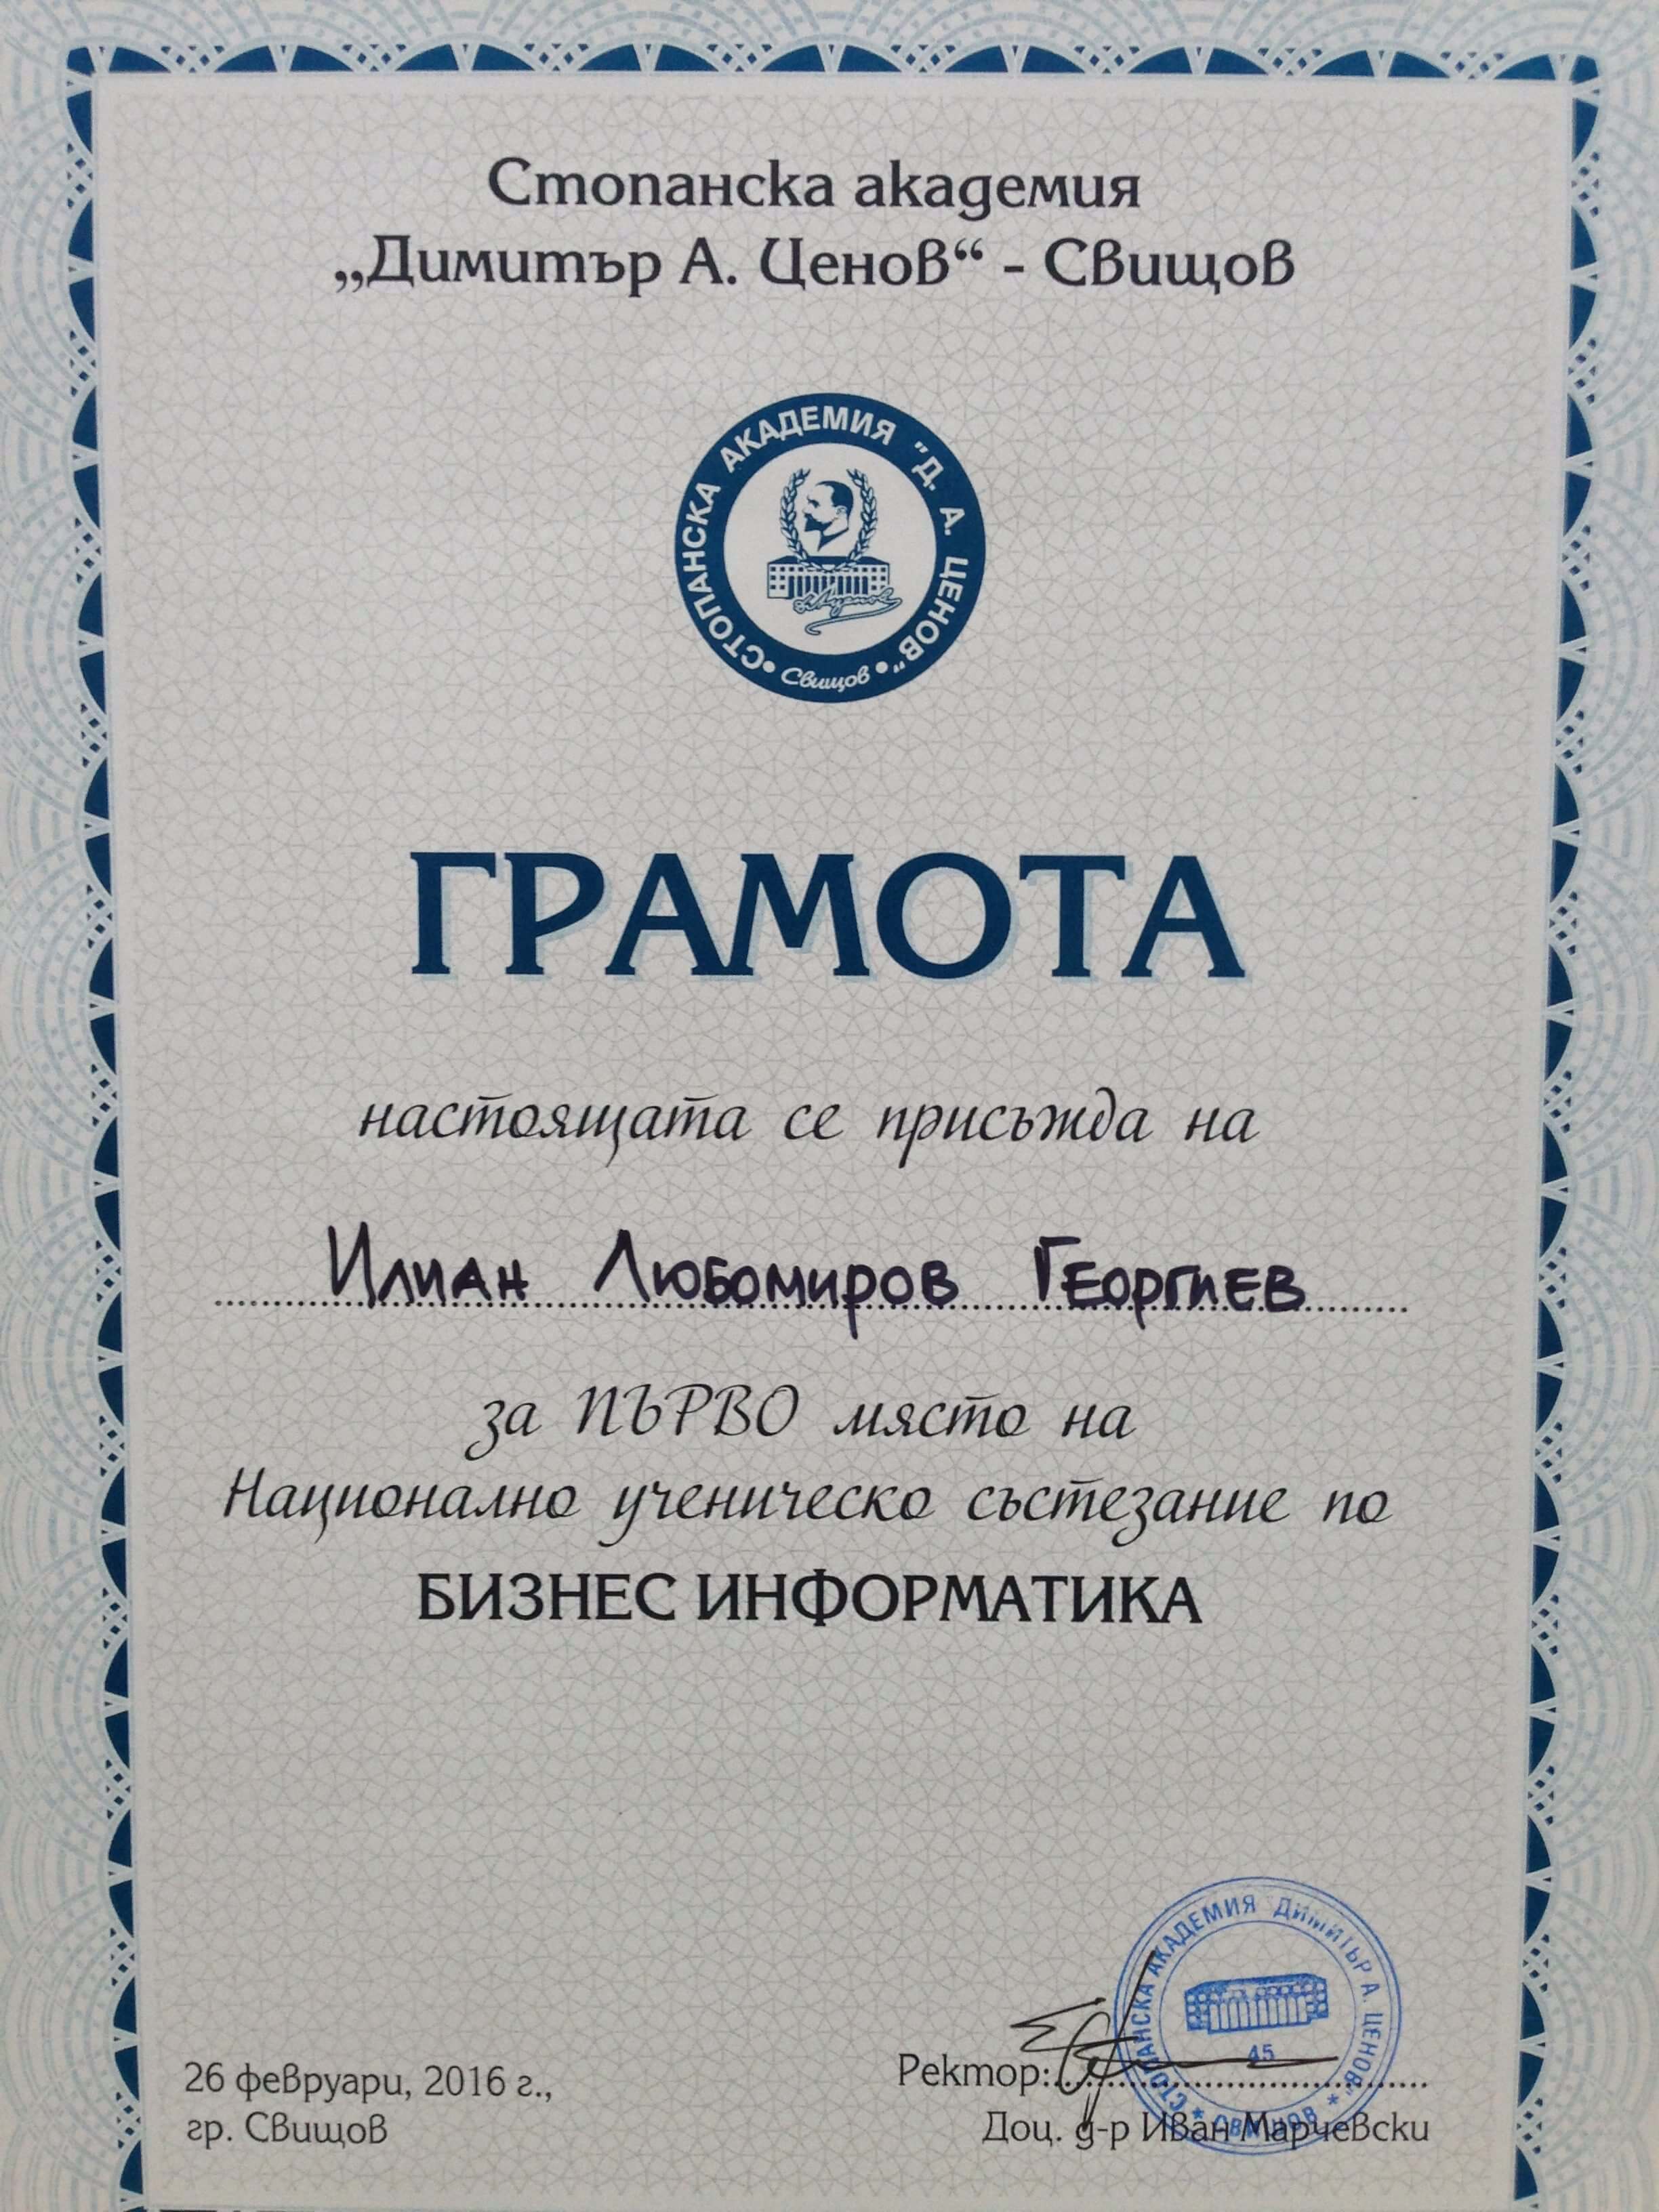 First place in the Business Informatics competition in Svishtov